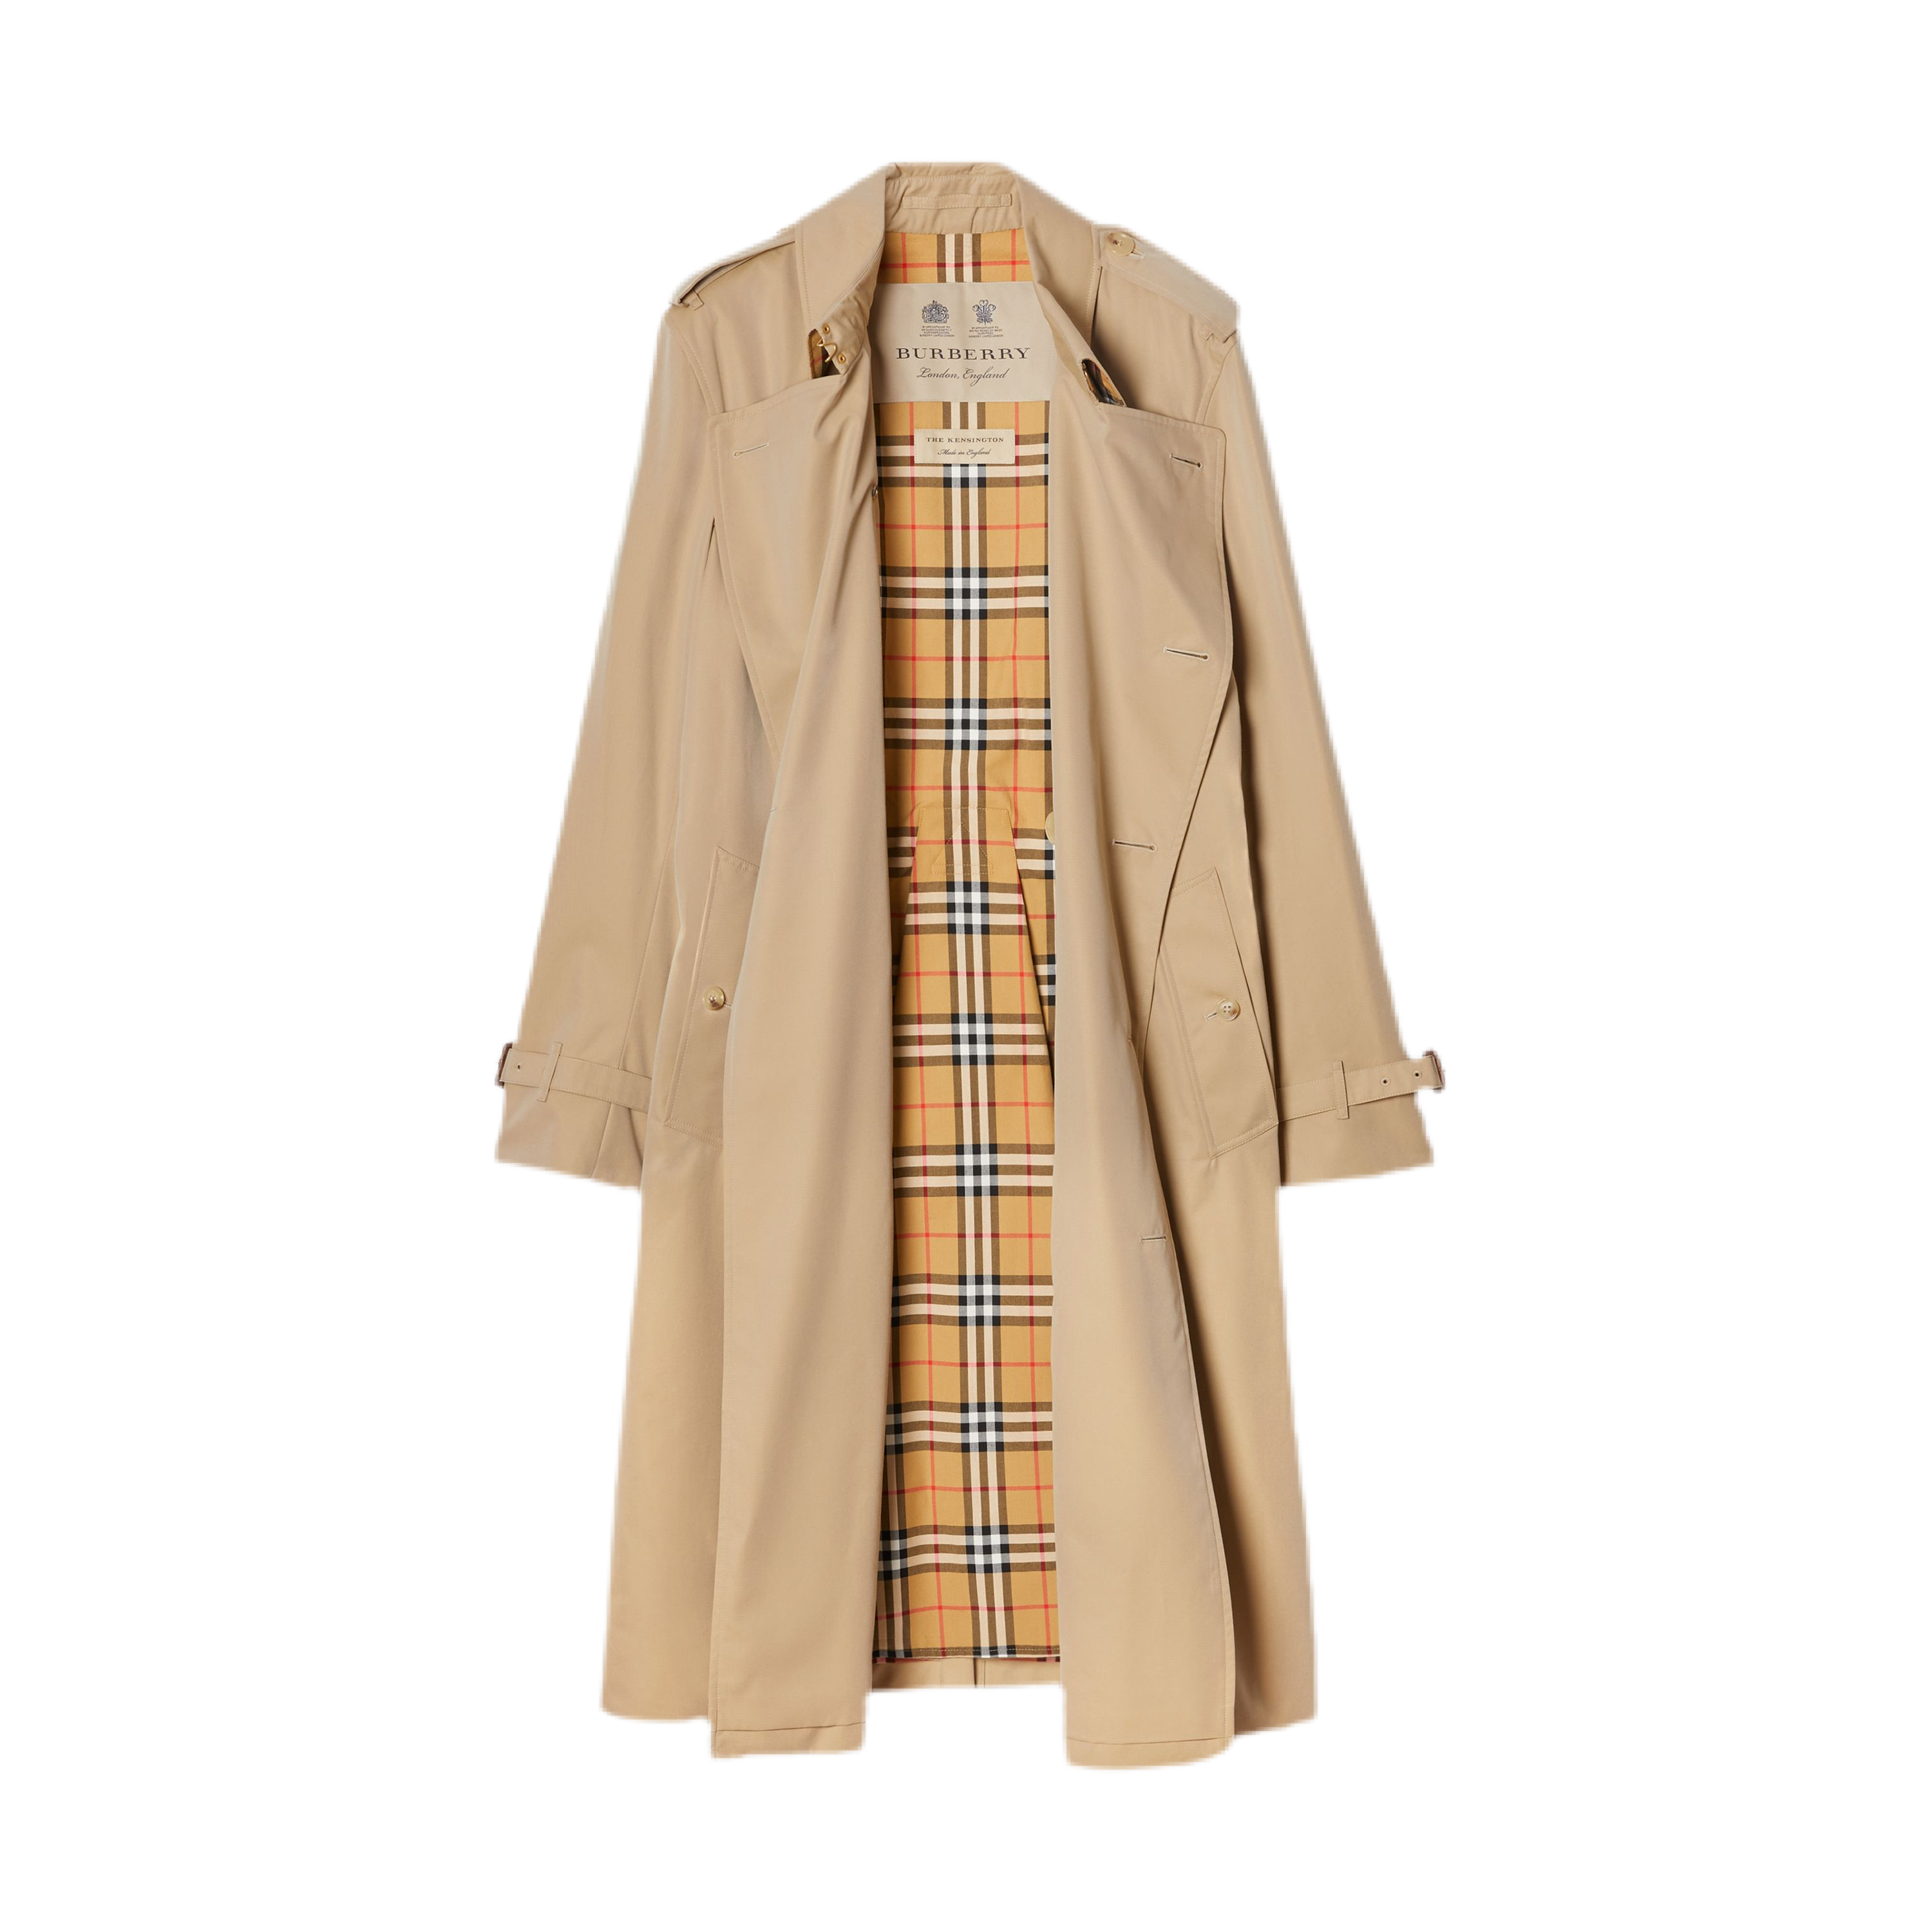 Burberry Trenchcoat Guide: Burberry Trenchcoats-Modelle im Überblick